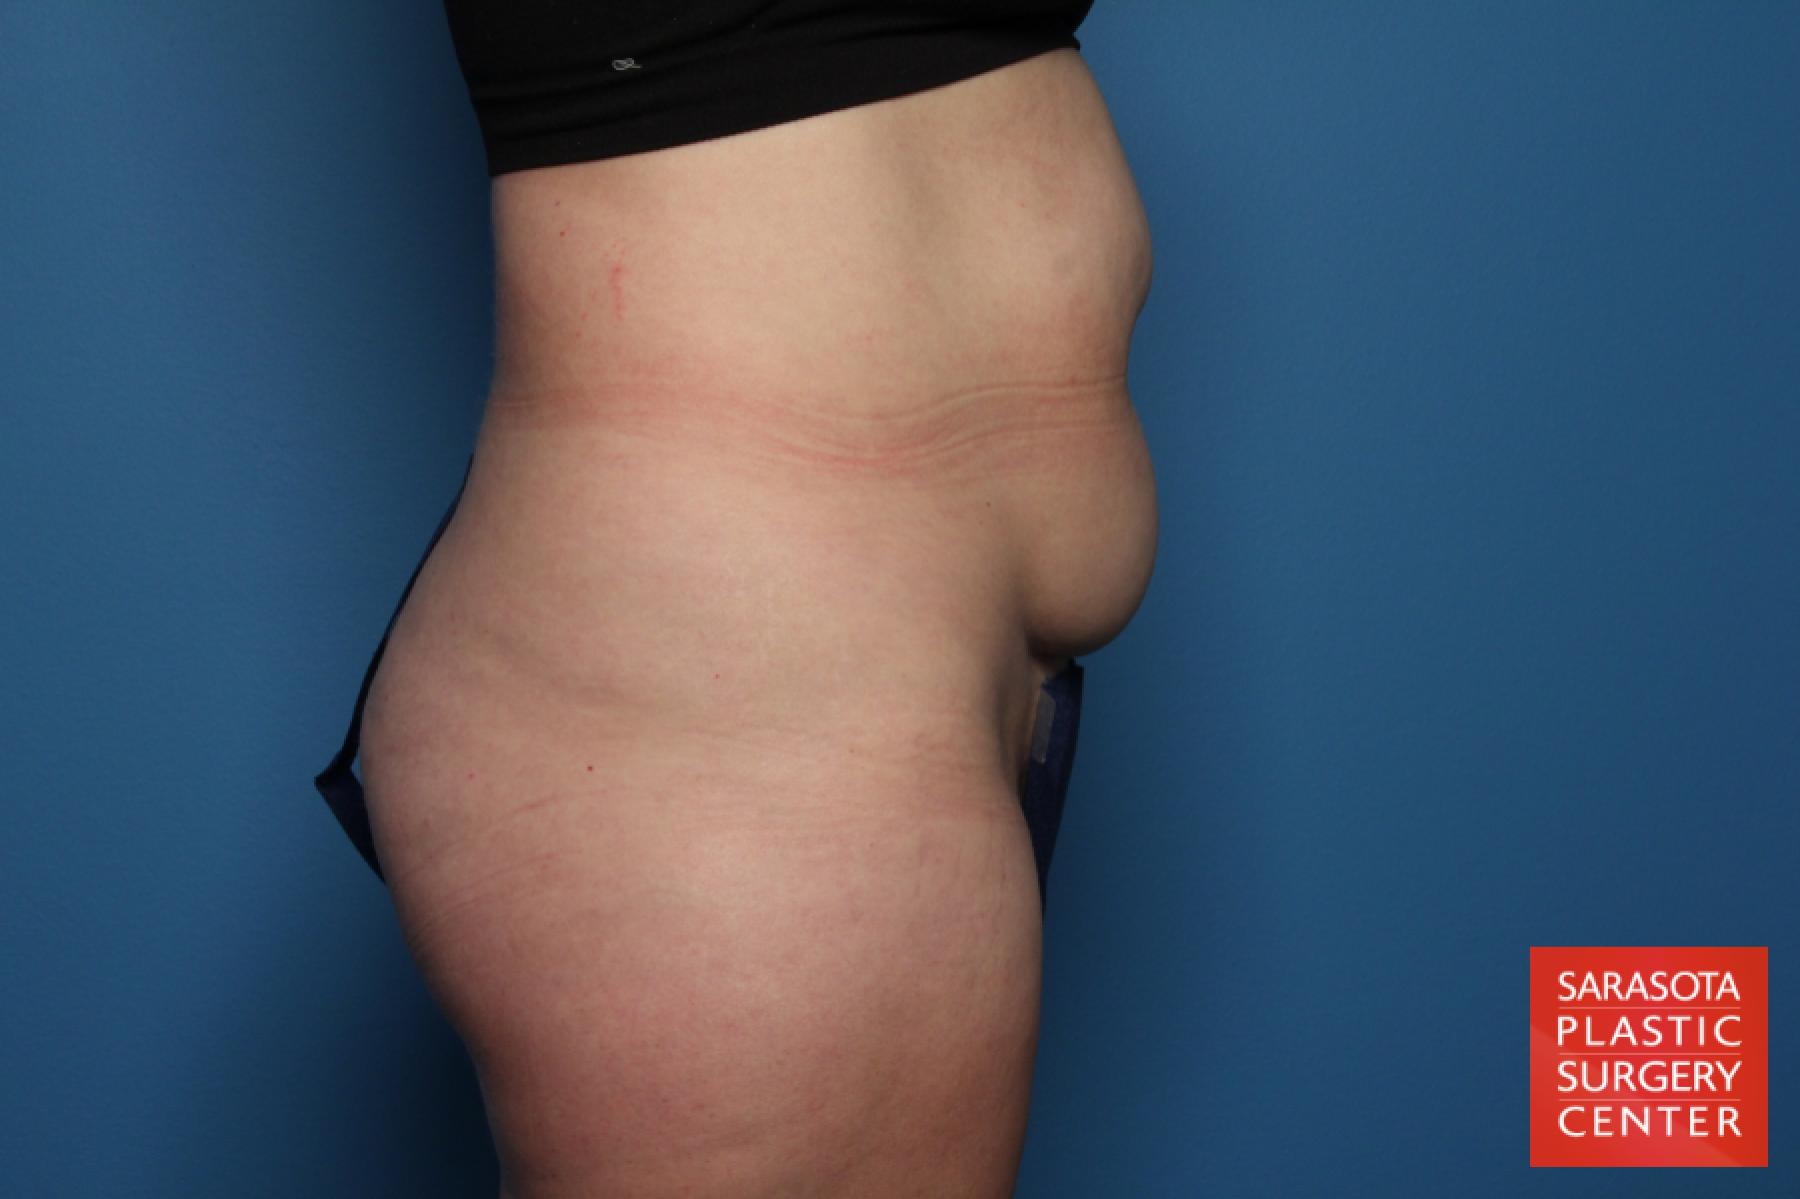 Mini Tummy Tuck: Patient 3 - Before and After 3